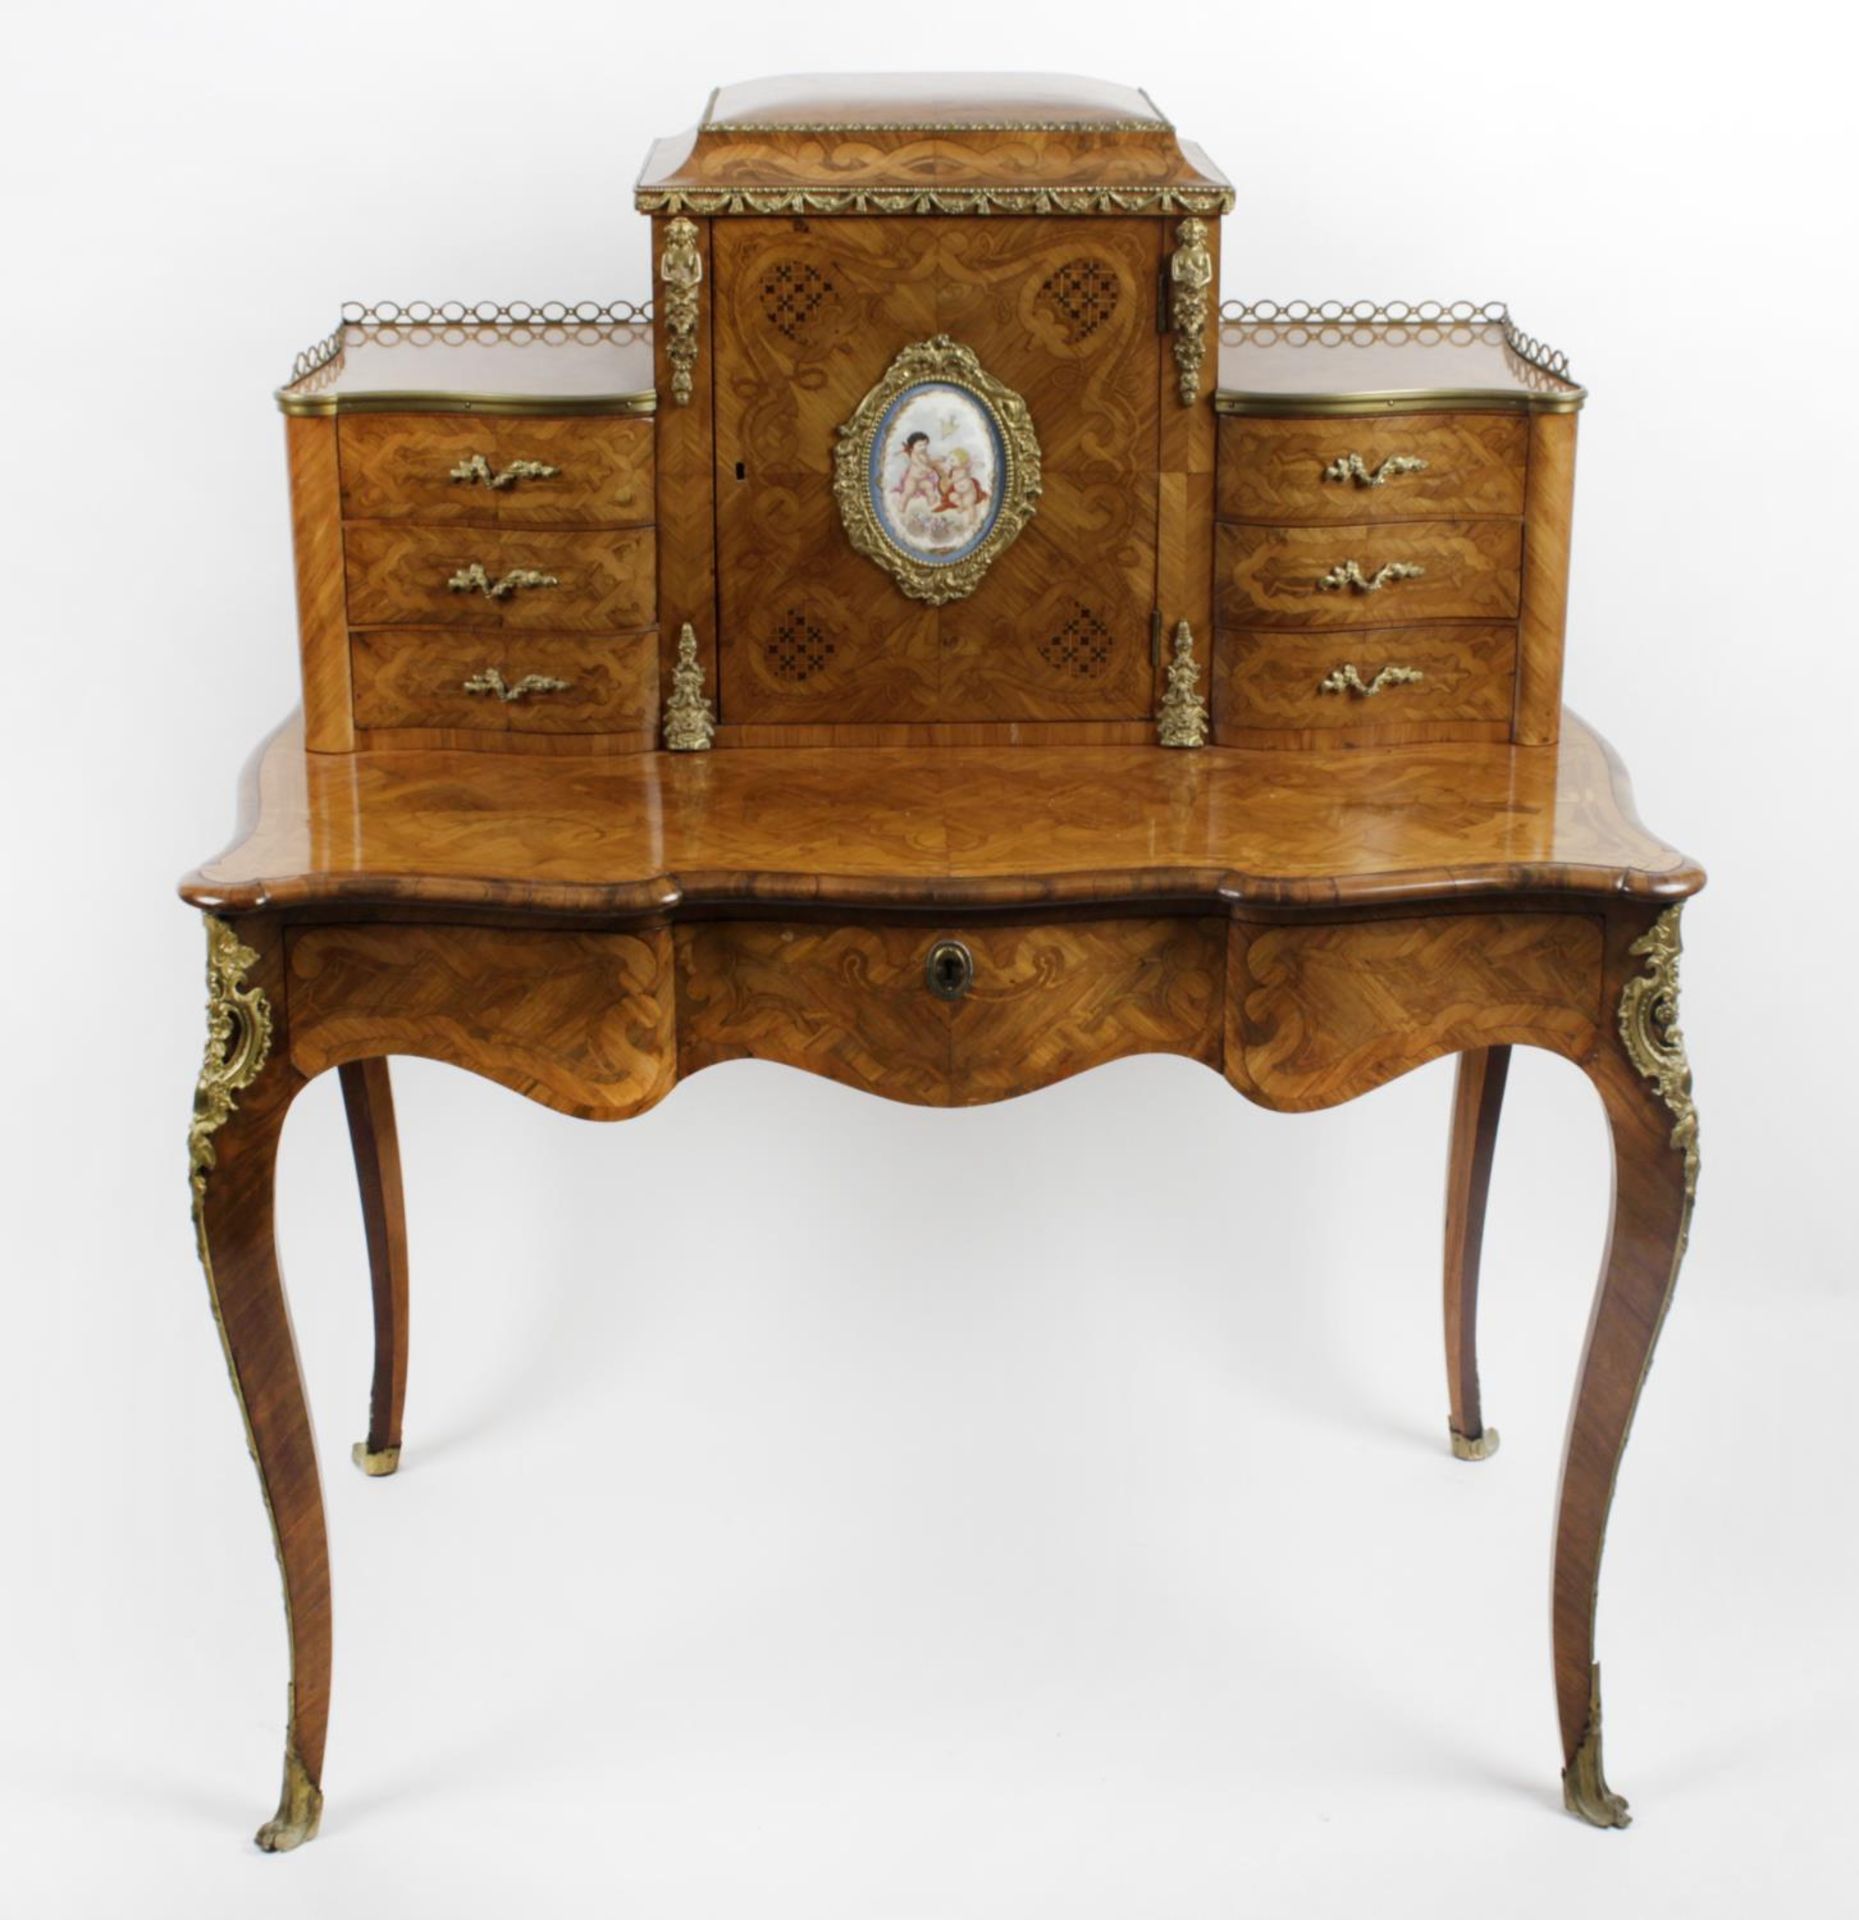 A late 19th century French satinwood and marquetry inlaid bonheur du jour,